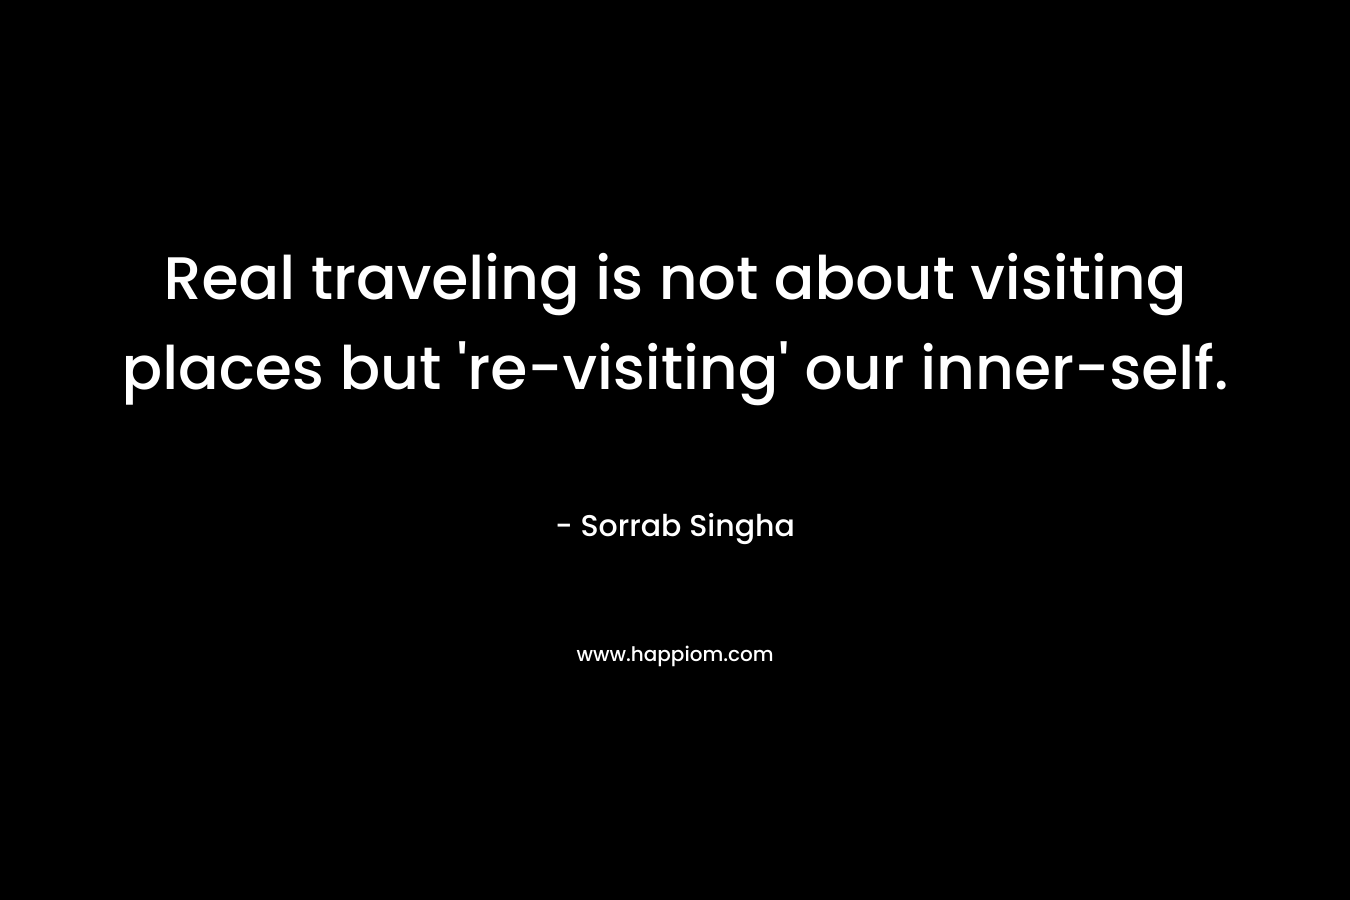 Real traveling is not about visiting places but ‘re-visiting’ our inner-self. – Sorrab Singha